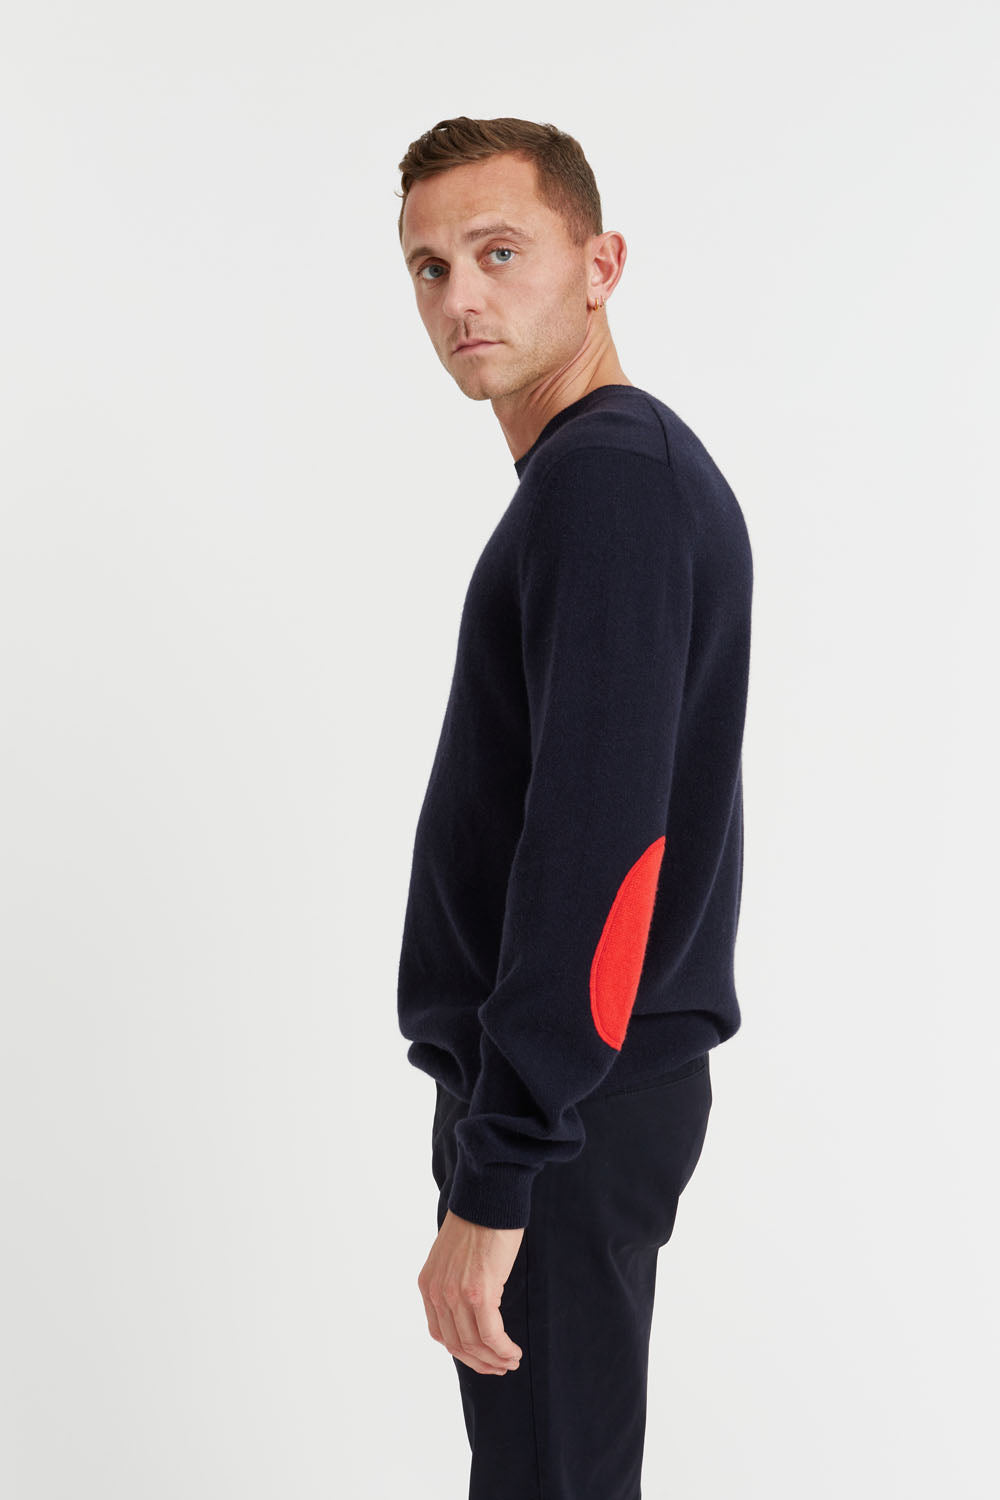 Navy Cashmere Elbow Patch Men's Sweater – Chinti & Parker UK